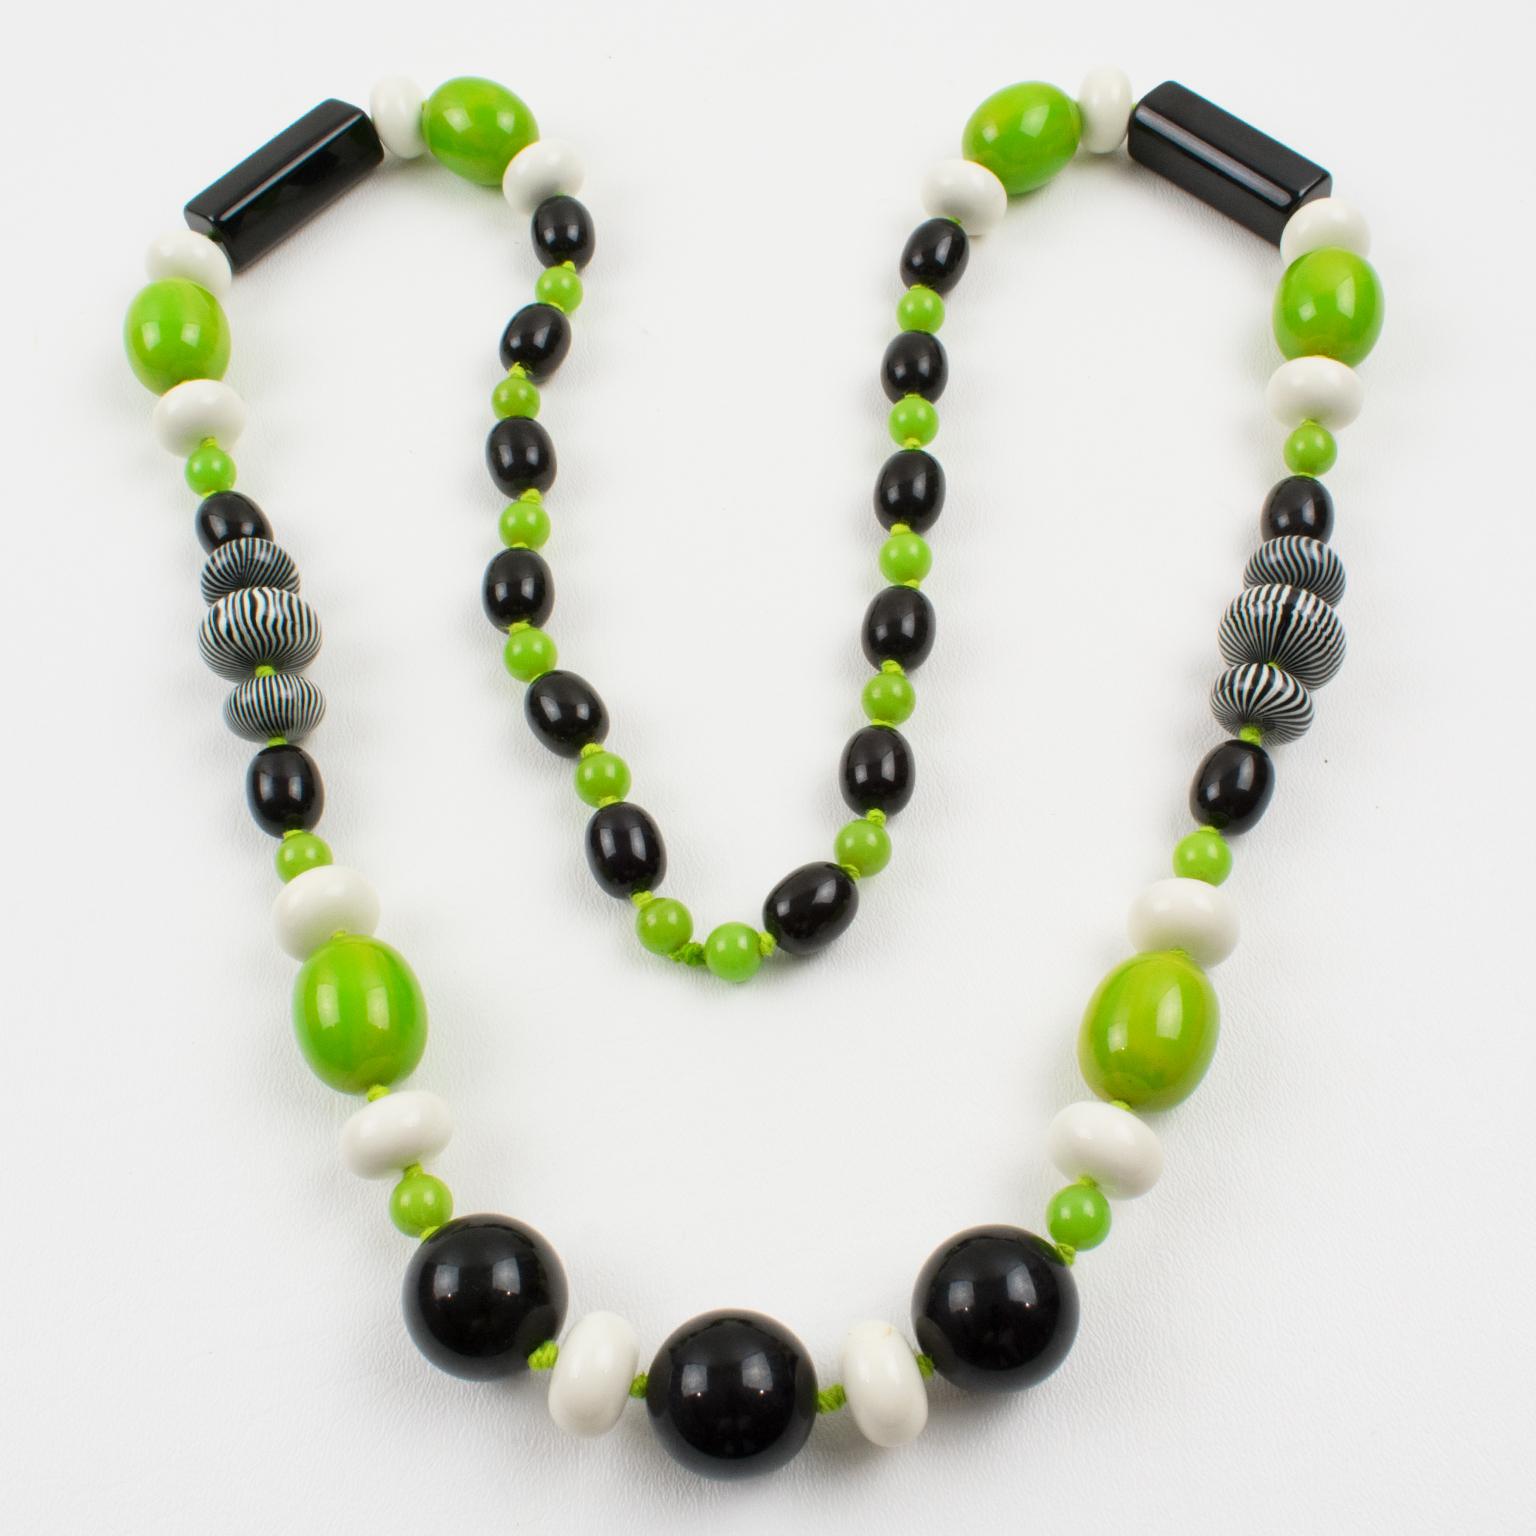 Charming extra-long Bakelite and Lucite beaded necklace. Assorted beads in various shapes: round, tomato, long stick, and oval, some with a pattern. Mix and match fancy colors, apple green marble, true licorice black contrasted with white Lucite